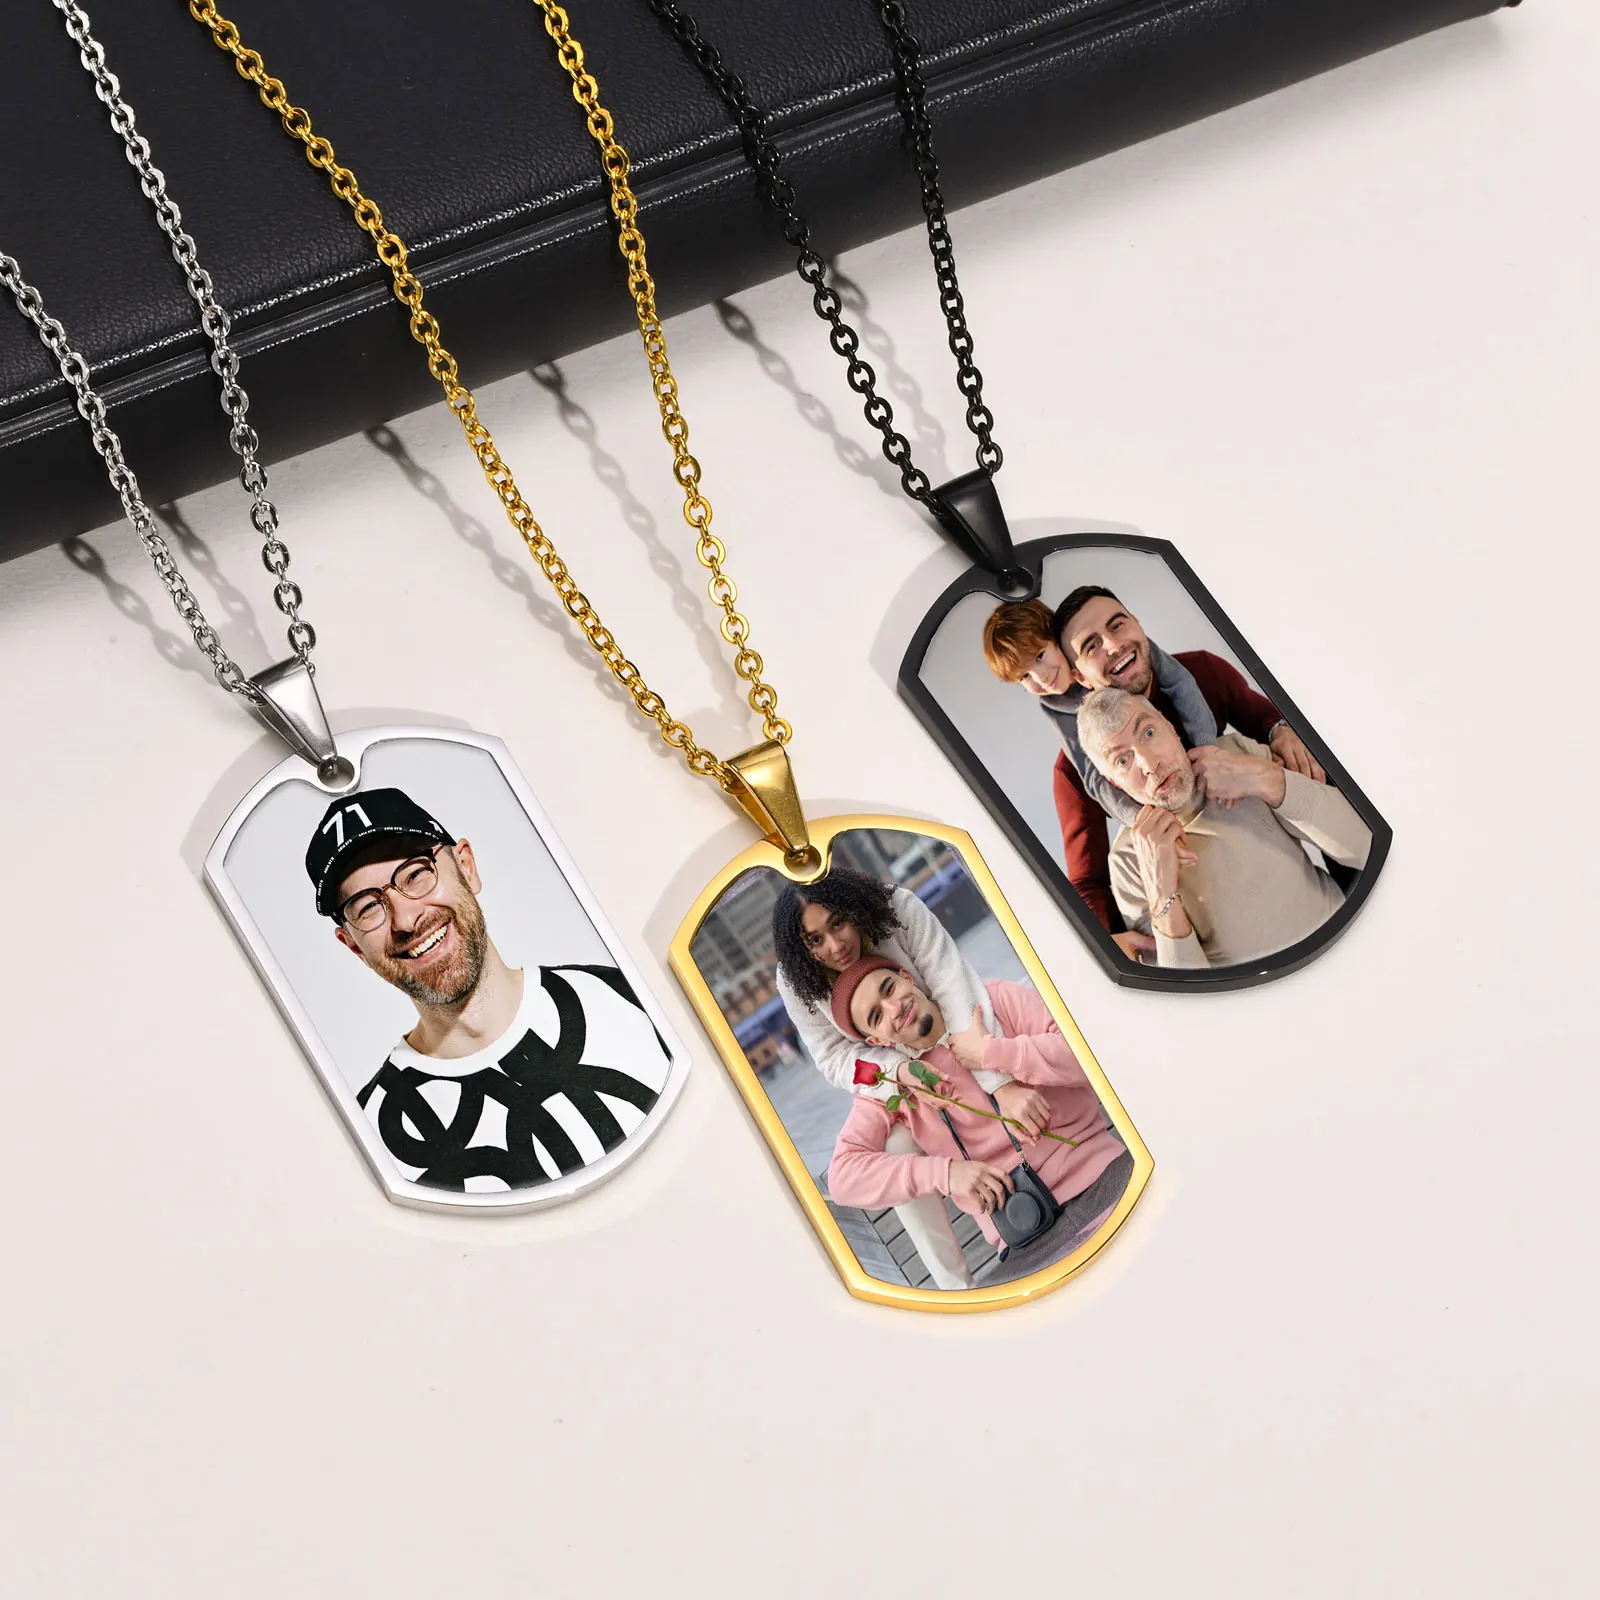 Men Personalize Engrave Name Custom The Photo of Family Pendant Necklaces,Picture Words Date Pendant Dogtag,Love Keepsake Gifts